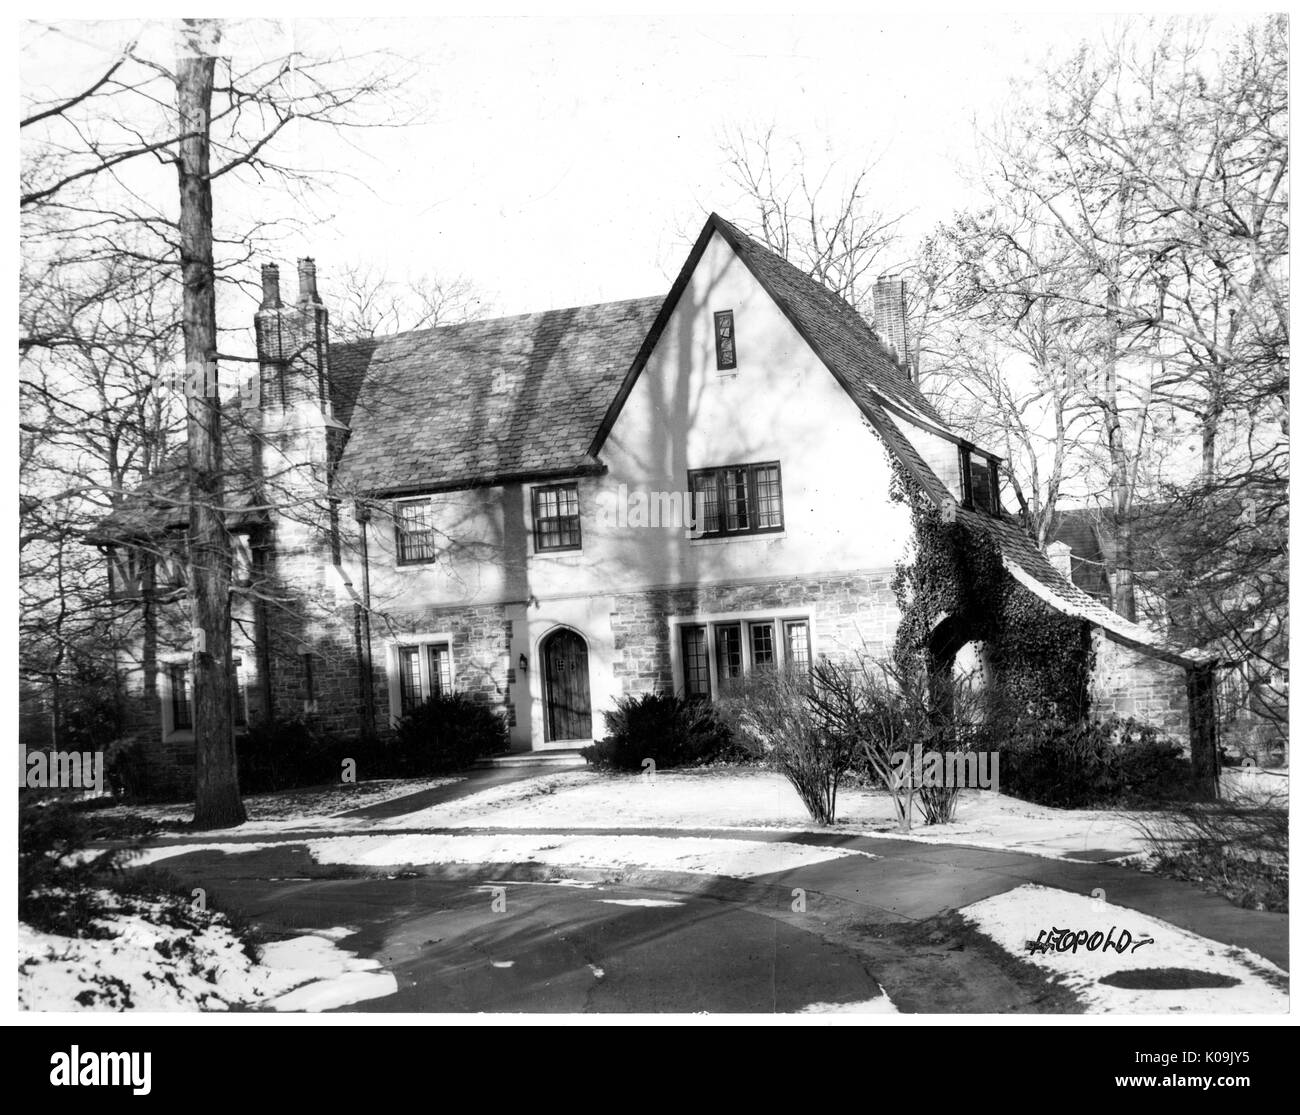 Front angle view of a single family house near Guilford, part of the house is made out of stone and the house is at least two stories, there is chimney that scales the front of the house, Baltimore, Maryland, 1910. This image is from a series documenting the construction and sale of homes in the Roland Park/Guilford neighborhood of Baltimore, a streetcar suburb and one of the first planned communities in the United States. The neighborhood was segregated, and is considered an early example of the enforcement of racial segregation through the use of restricted covenants. Stock Photo